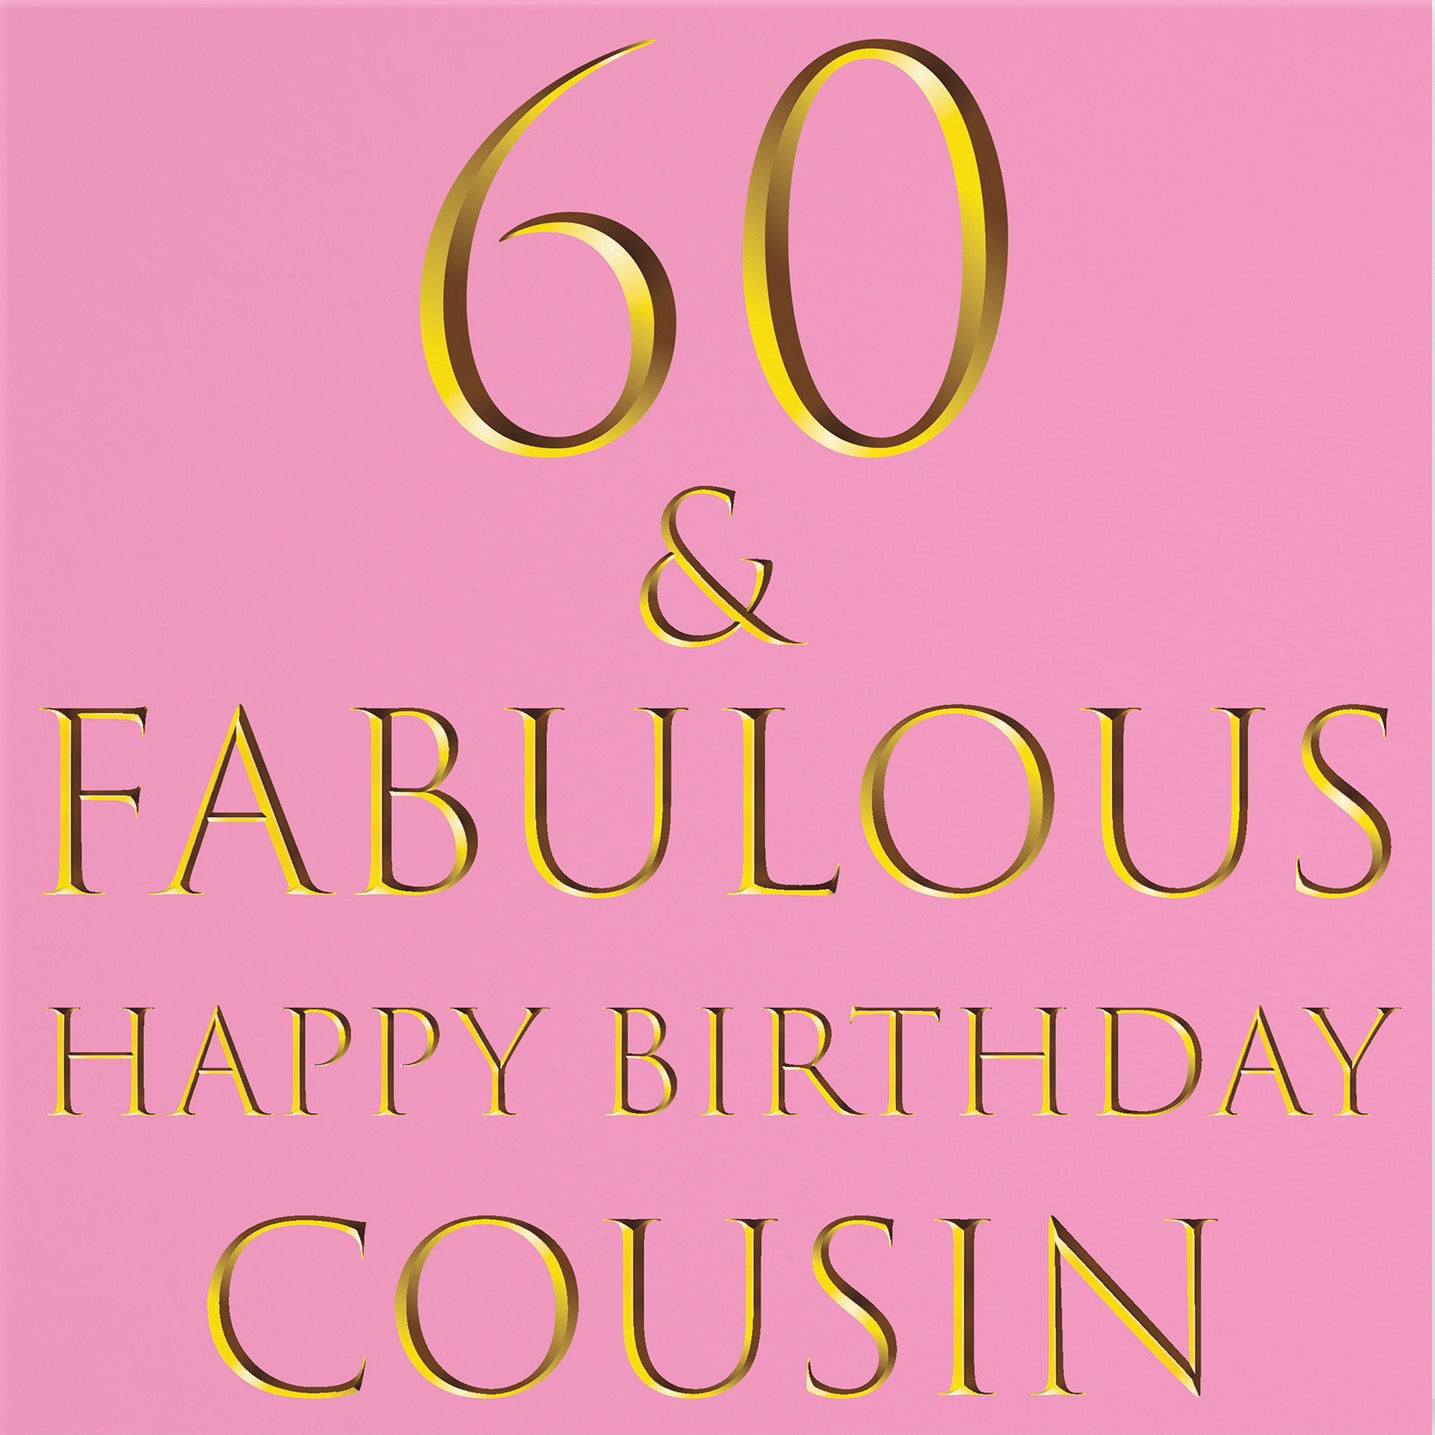 60th Cousin Birthday Card Still Totally Fabulous - Default Title (B08L1FH6TY)